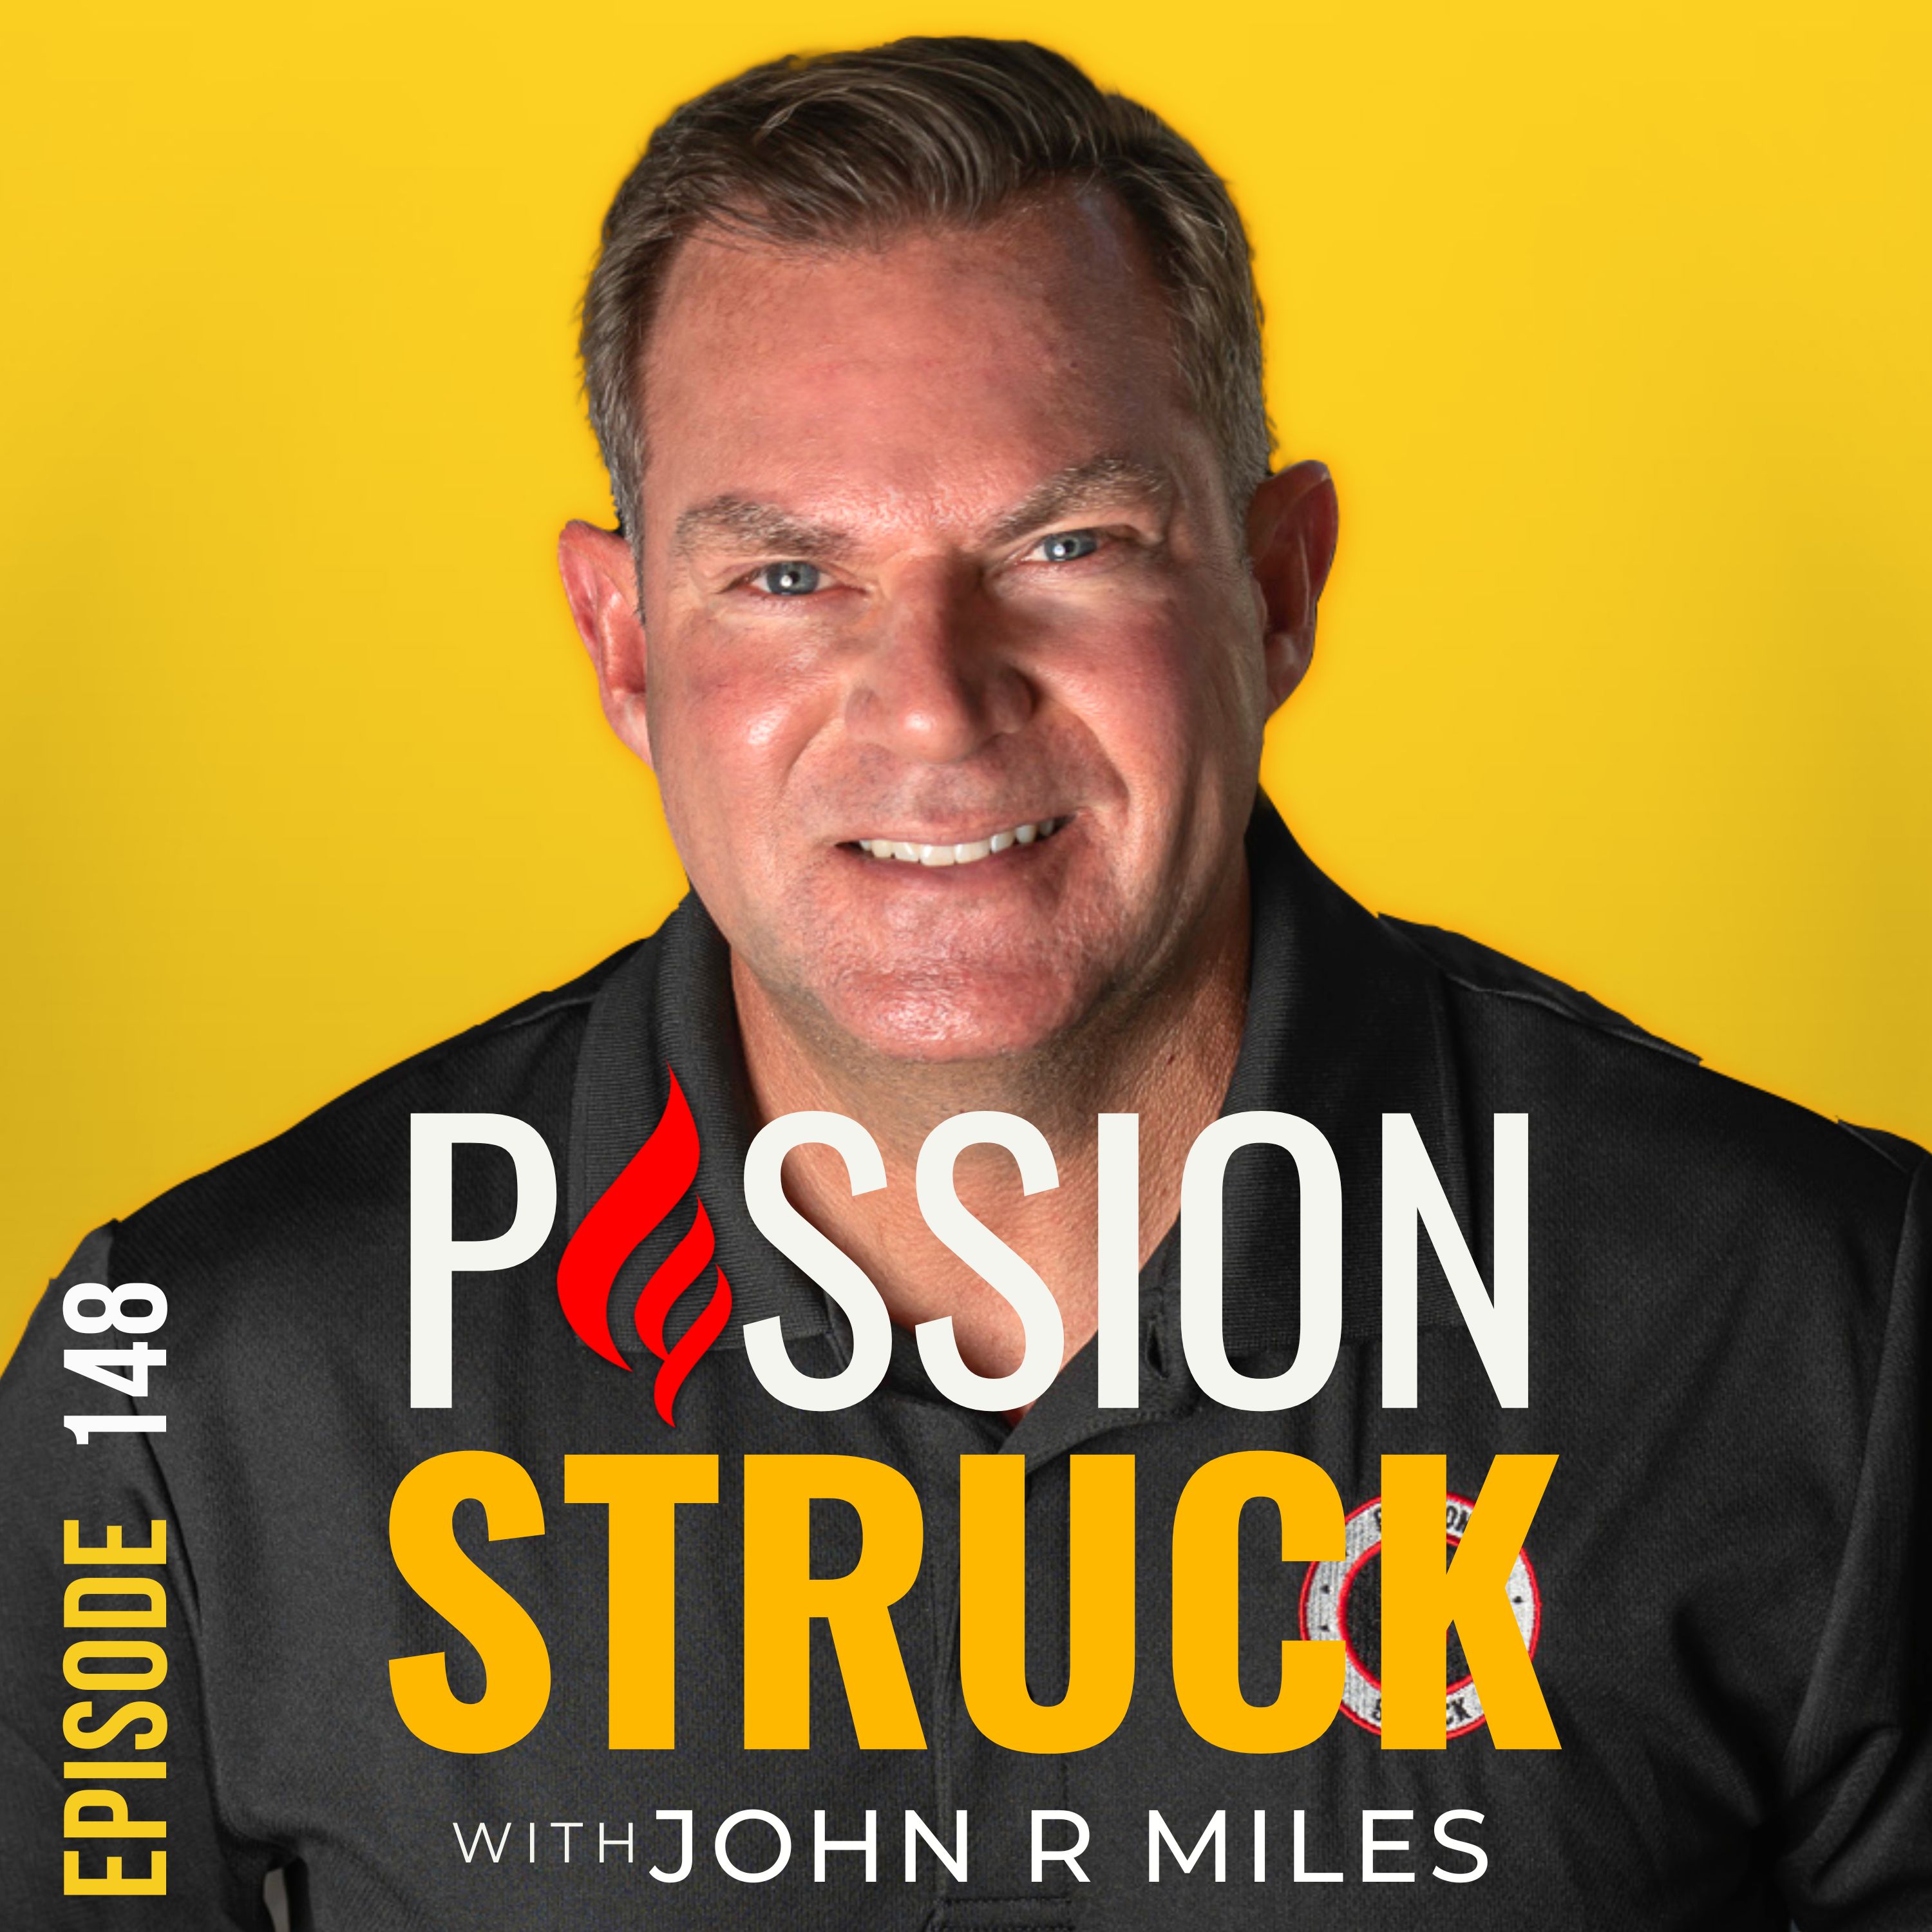 Passion Struck with John R. Miles episode 148 on Why Life Is About The Journey Not The Destination